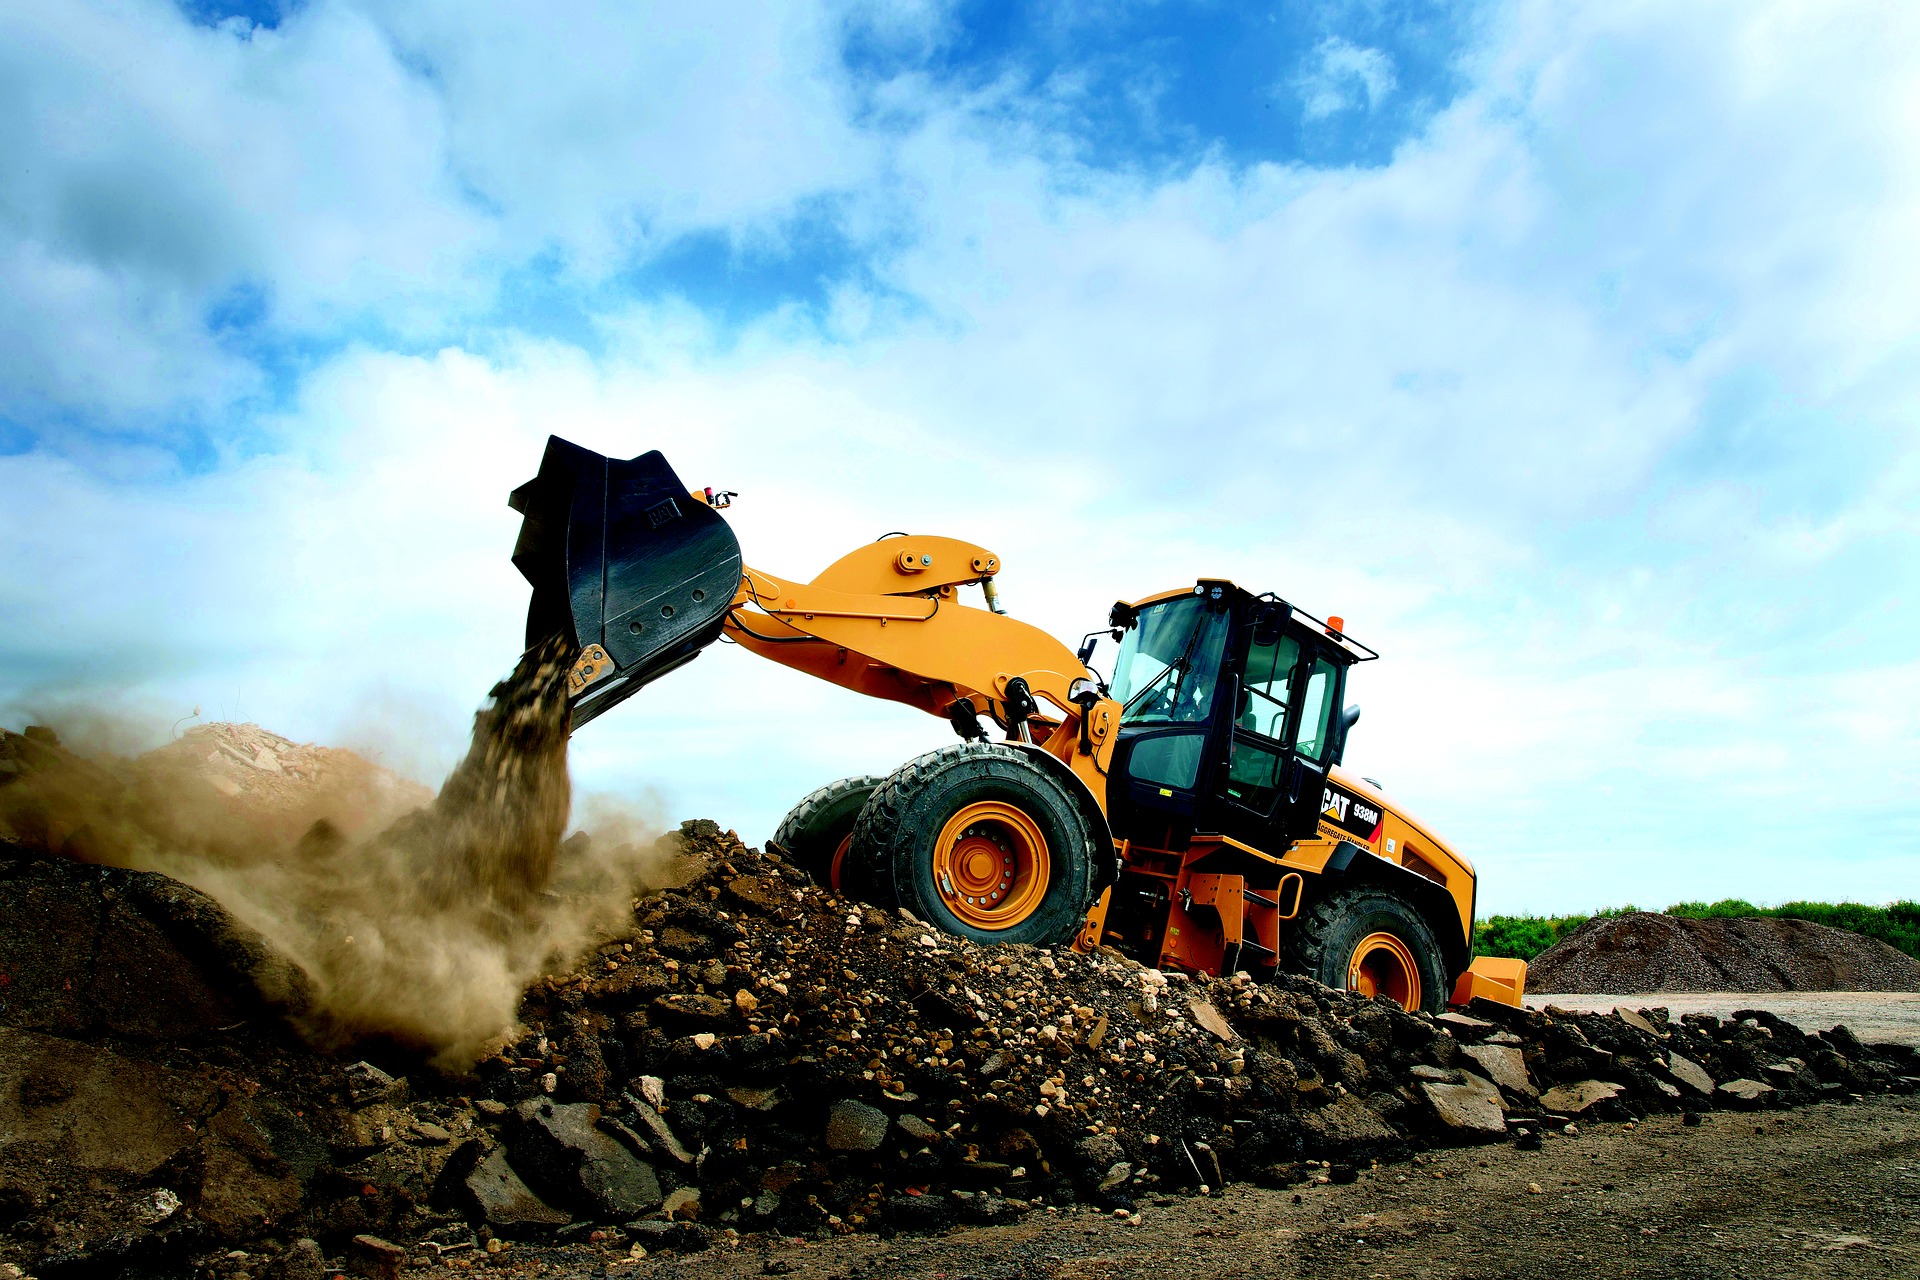 Finning's customers can view key data about their Cat assets using the platform